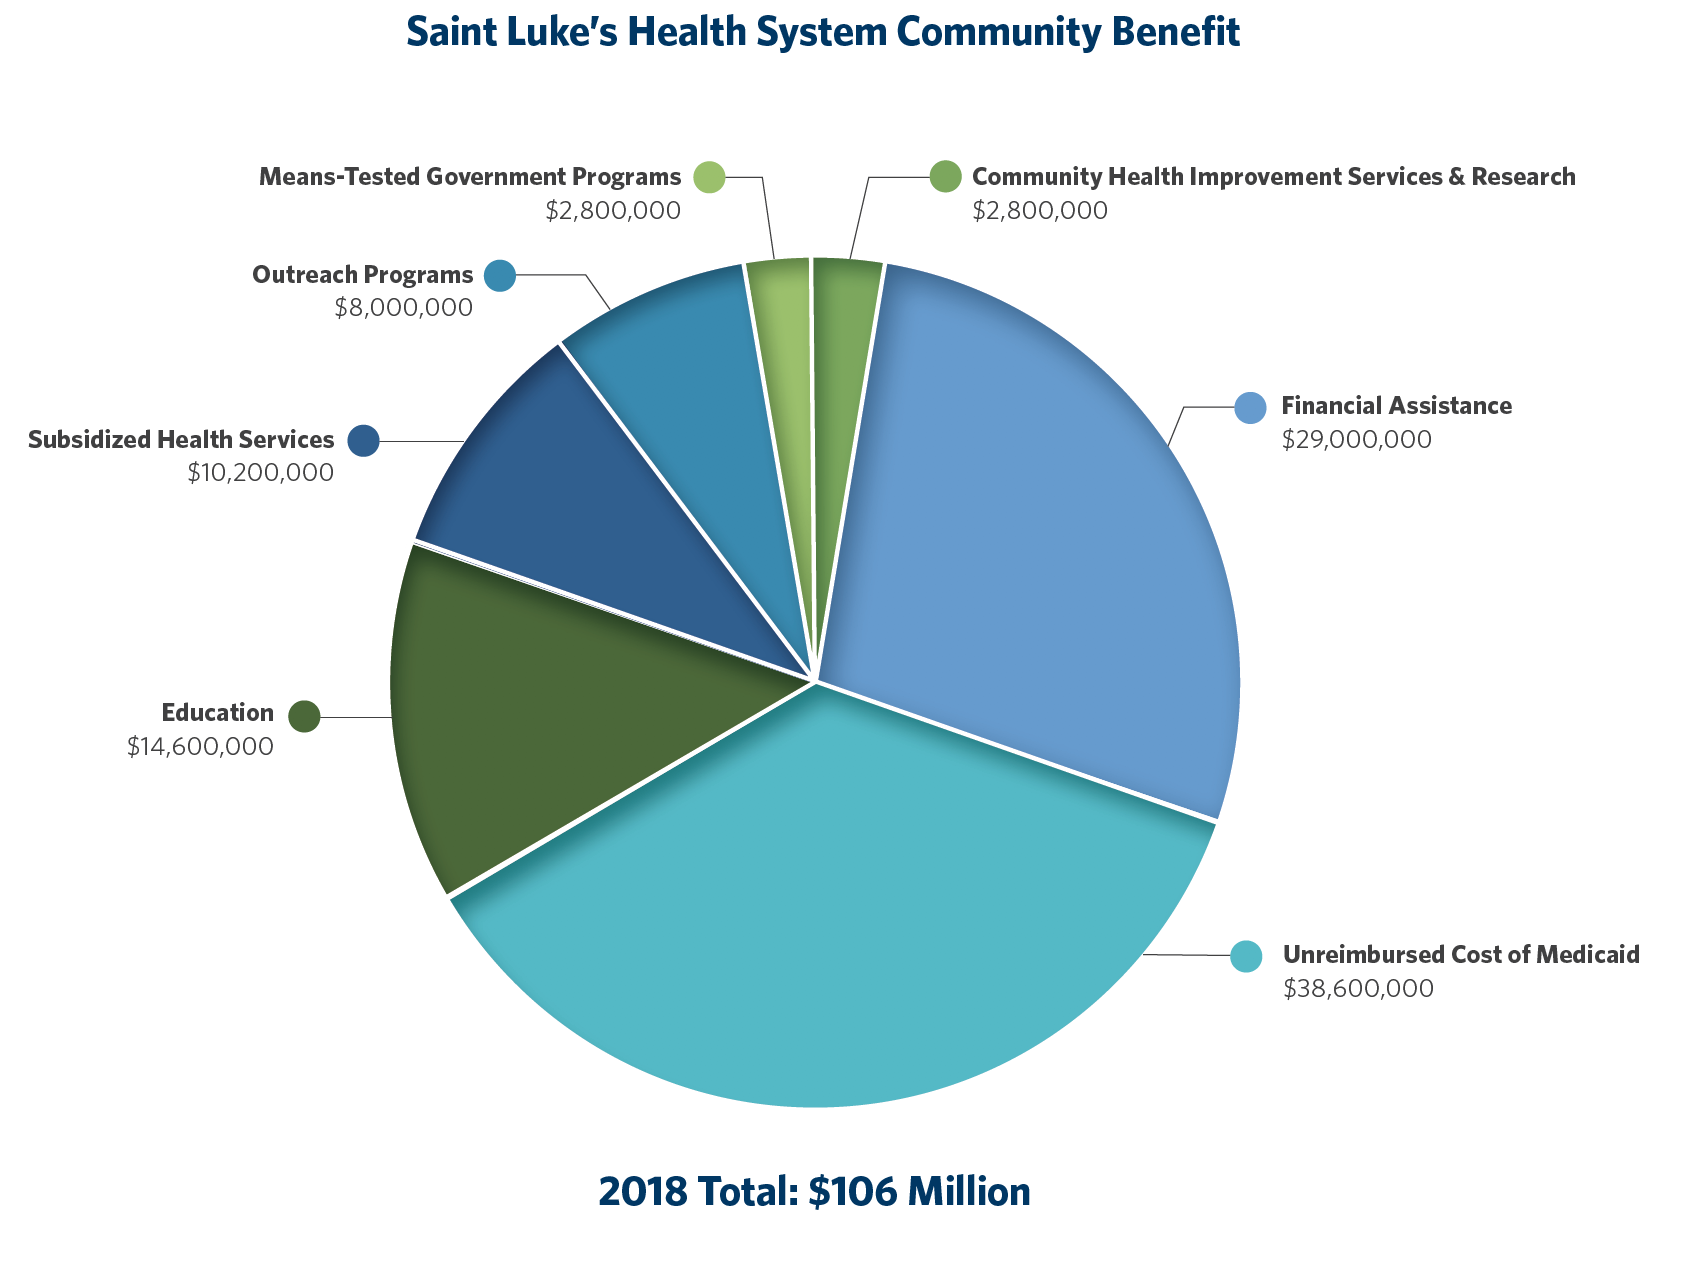 A pie chart displaying various Community Benefit areas by Saint Luke's Health System